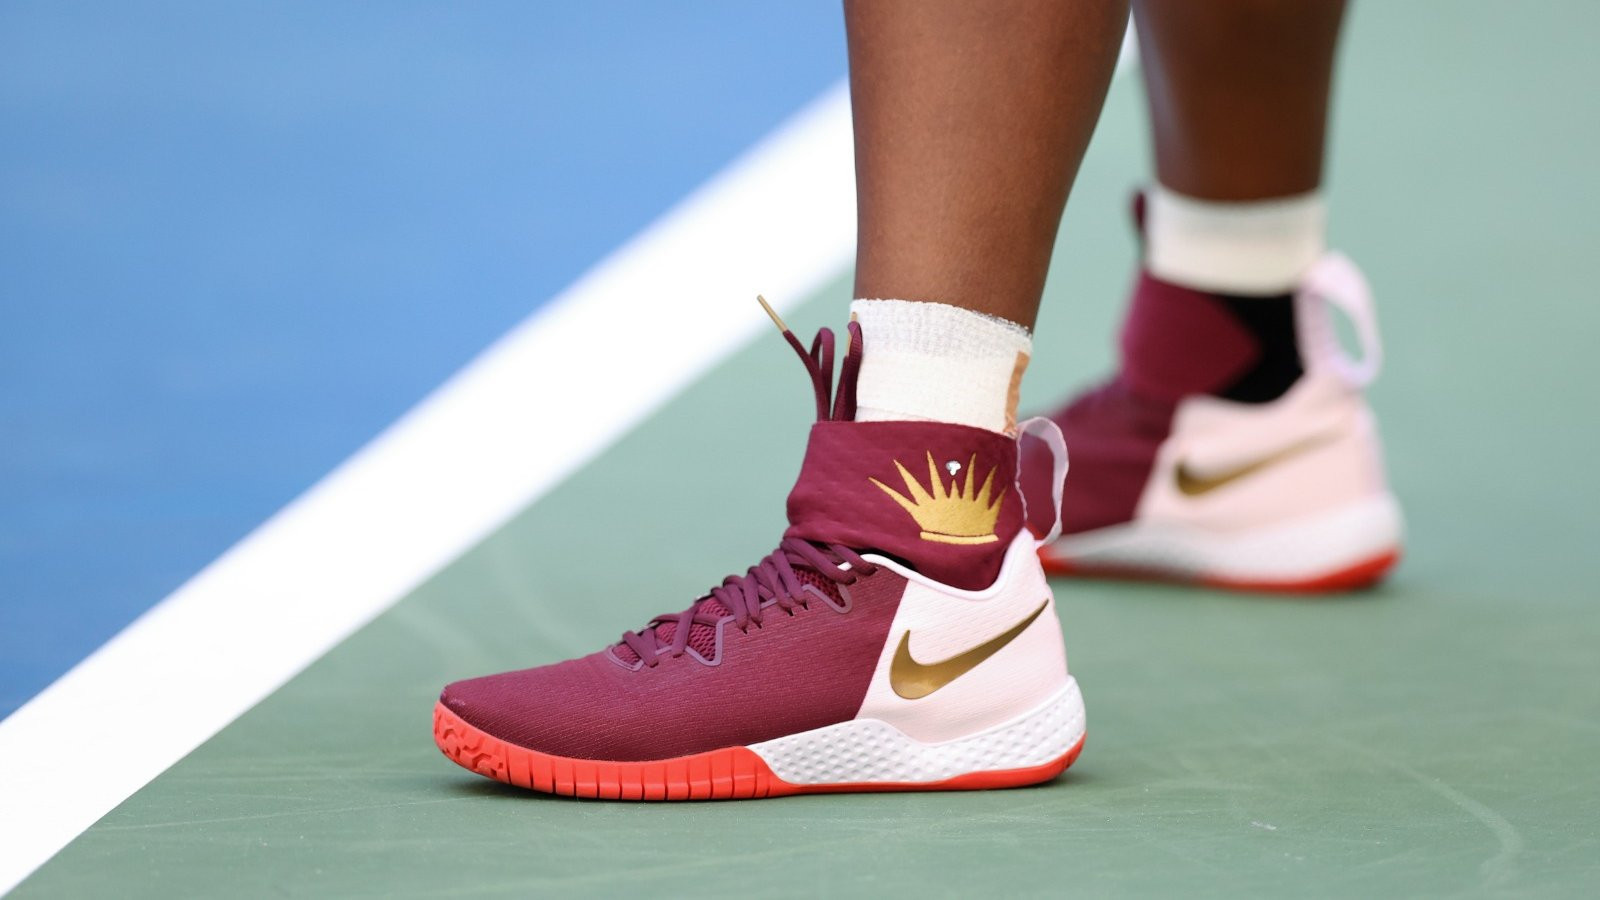 Serena Williams, as befitting the queen of tennis, sported some fancy footwear during her match against Sloane Stephens ©Getty Images